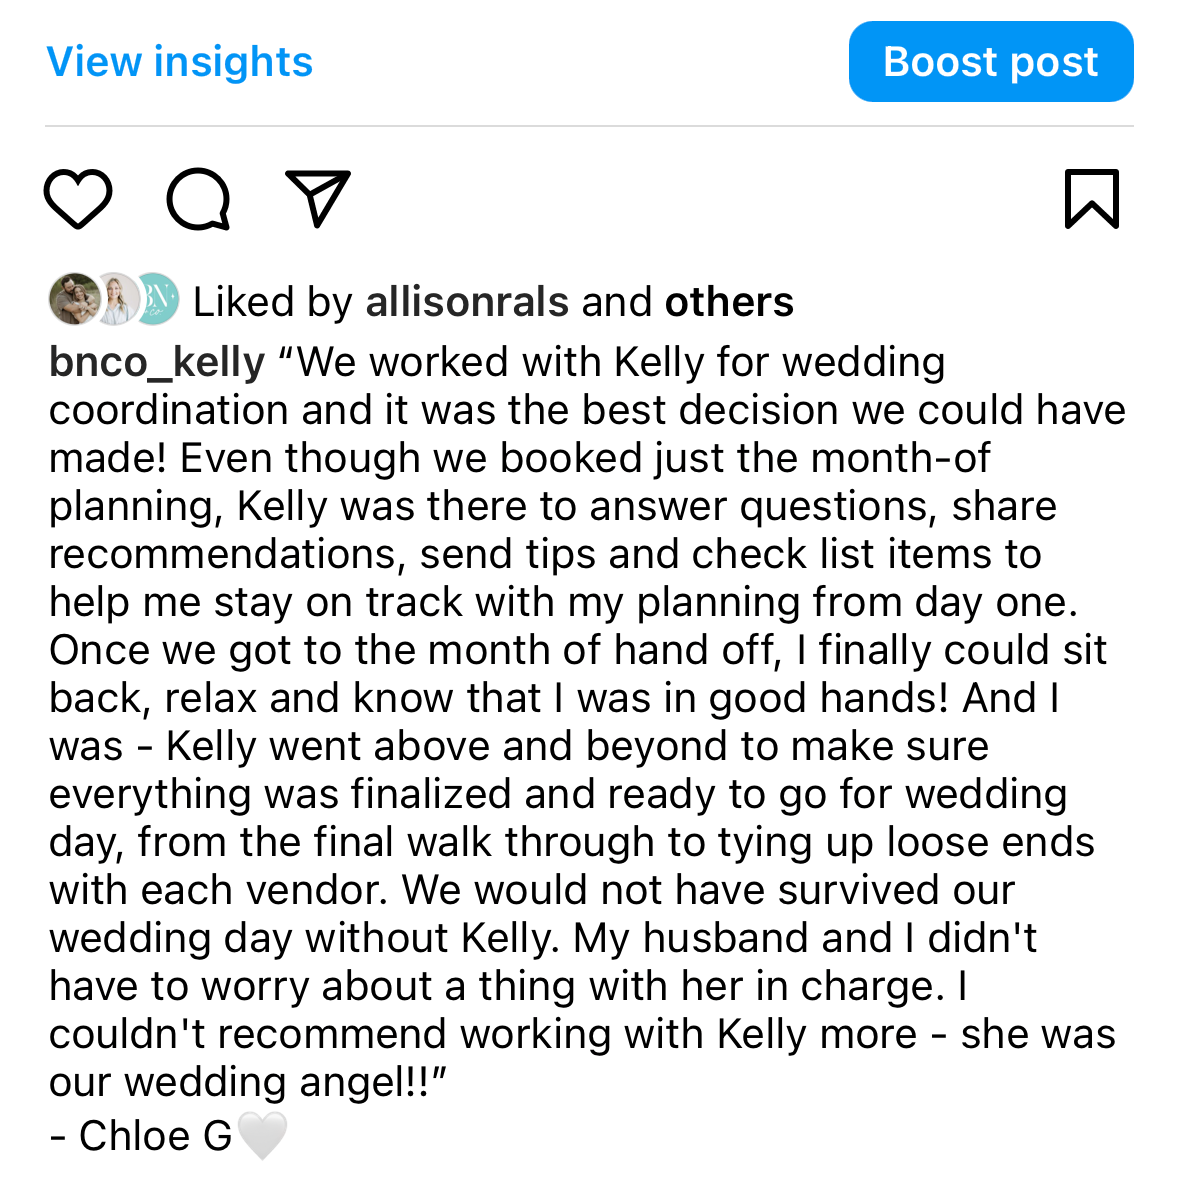 Instagram caption that shares review of a wedding planner